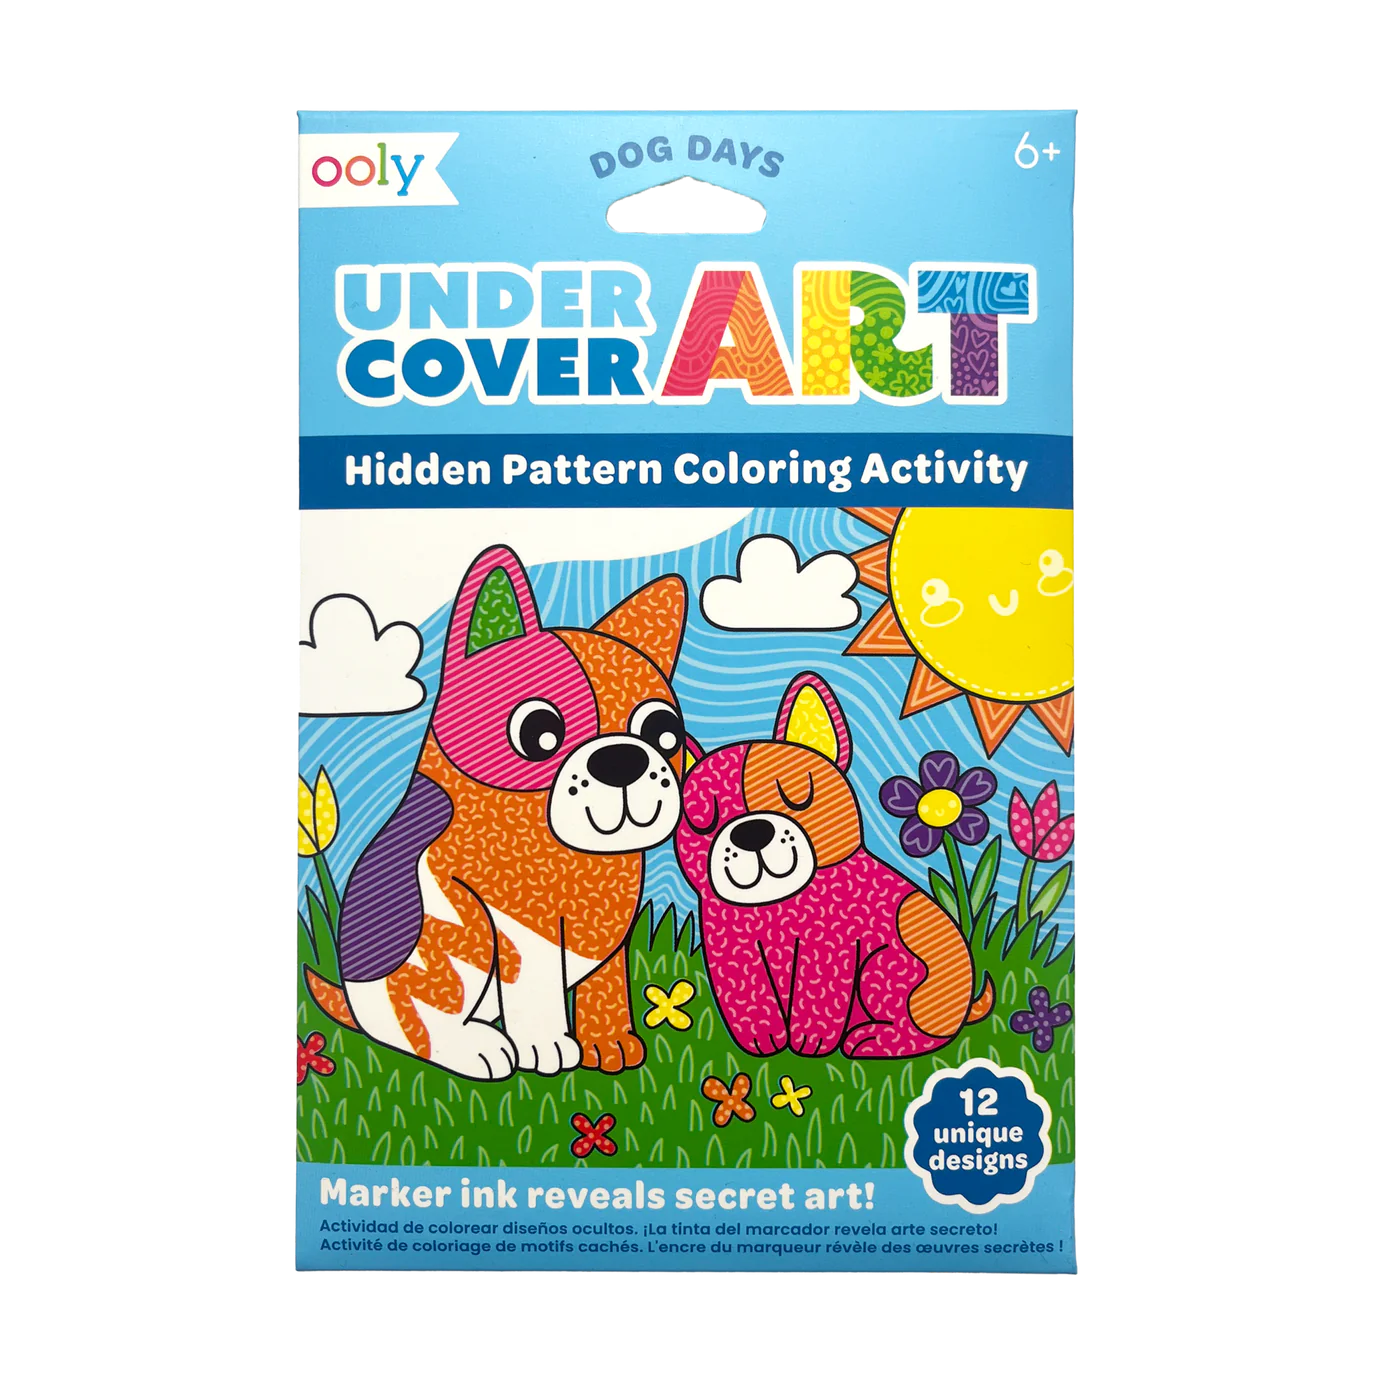 Ooly Undercover Art Hidden Pattern Coloring Activity Art Cards - Dog Days-OOLY-Little Giant Kidz